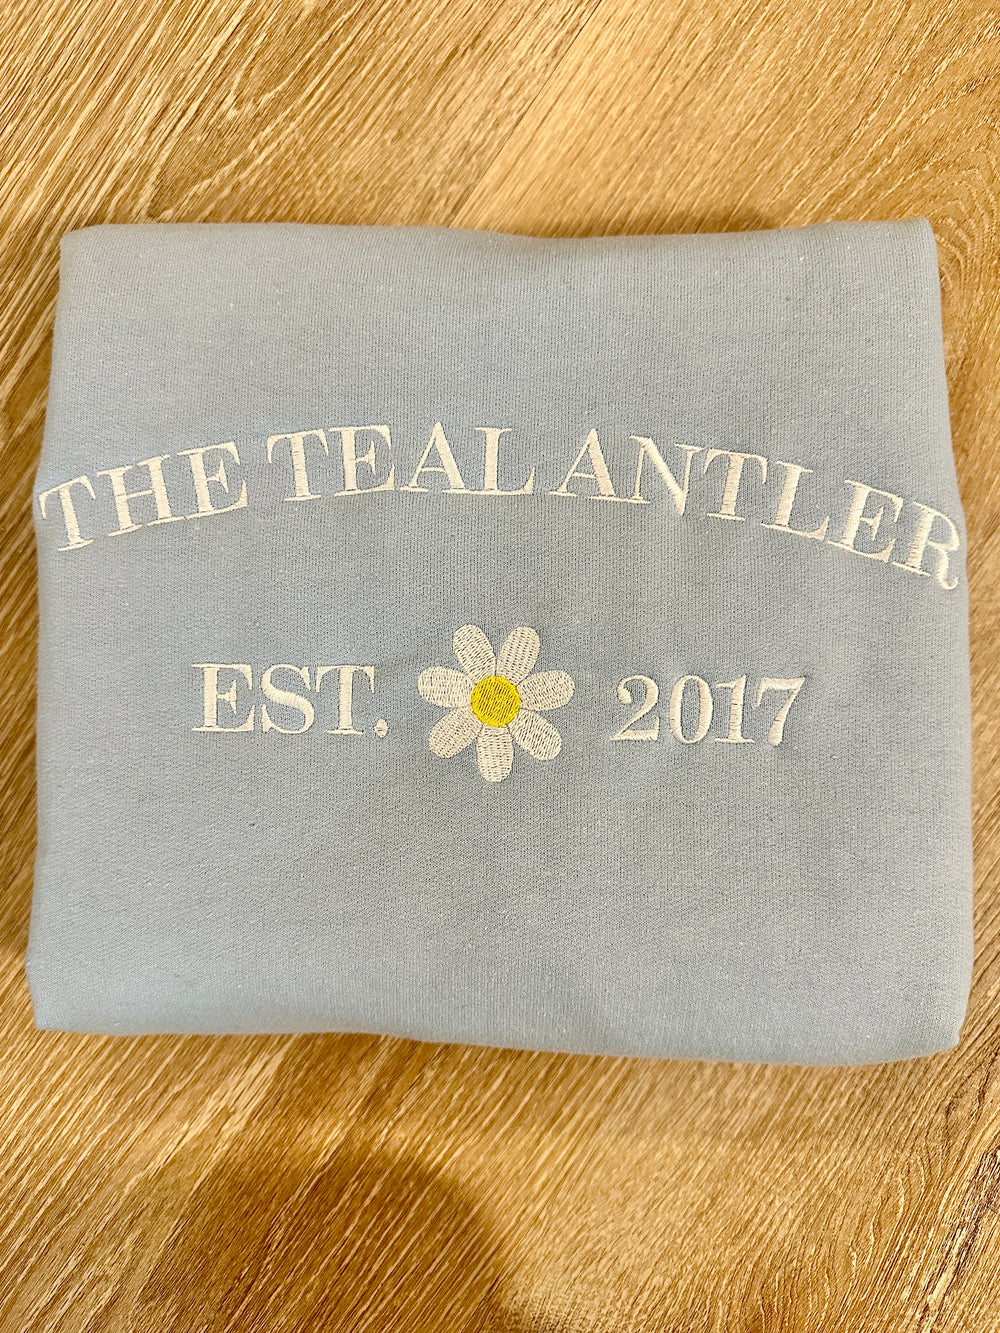 The Teal Antler- Daisy Embroidered Crew Neck - The Teal Antler Boutique